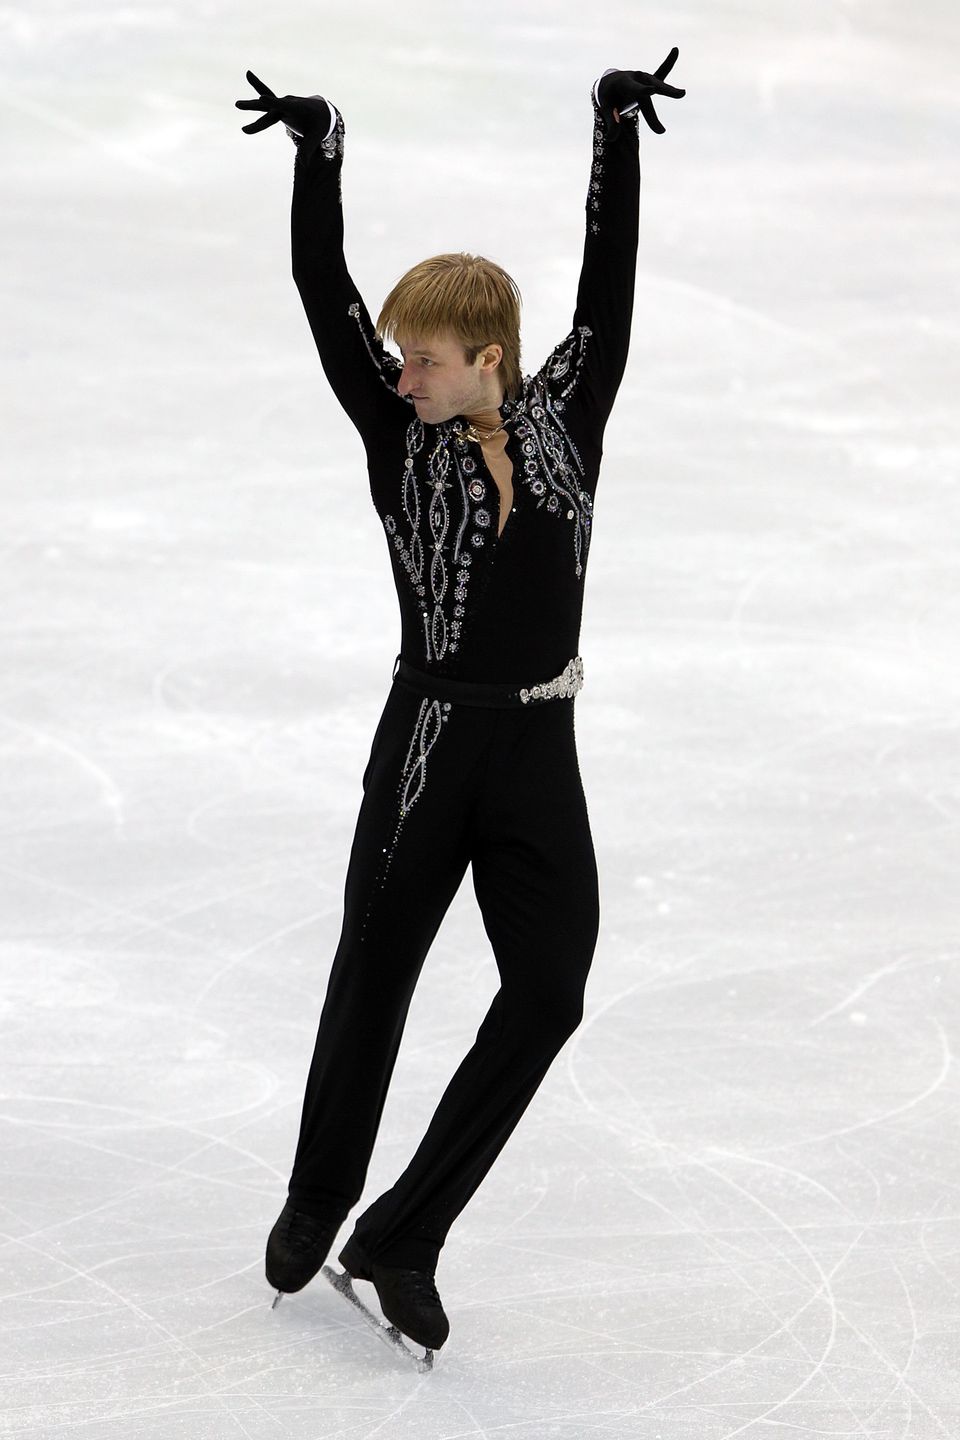 The Epic Evolution Of Men's Figure Skating Costumes Through The Years